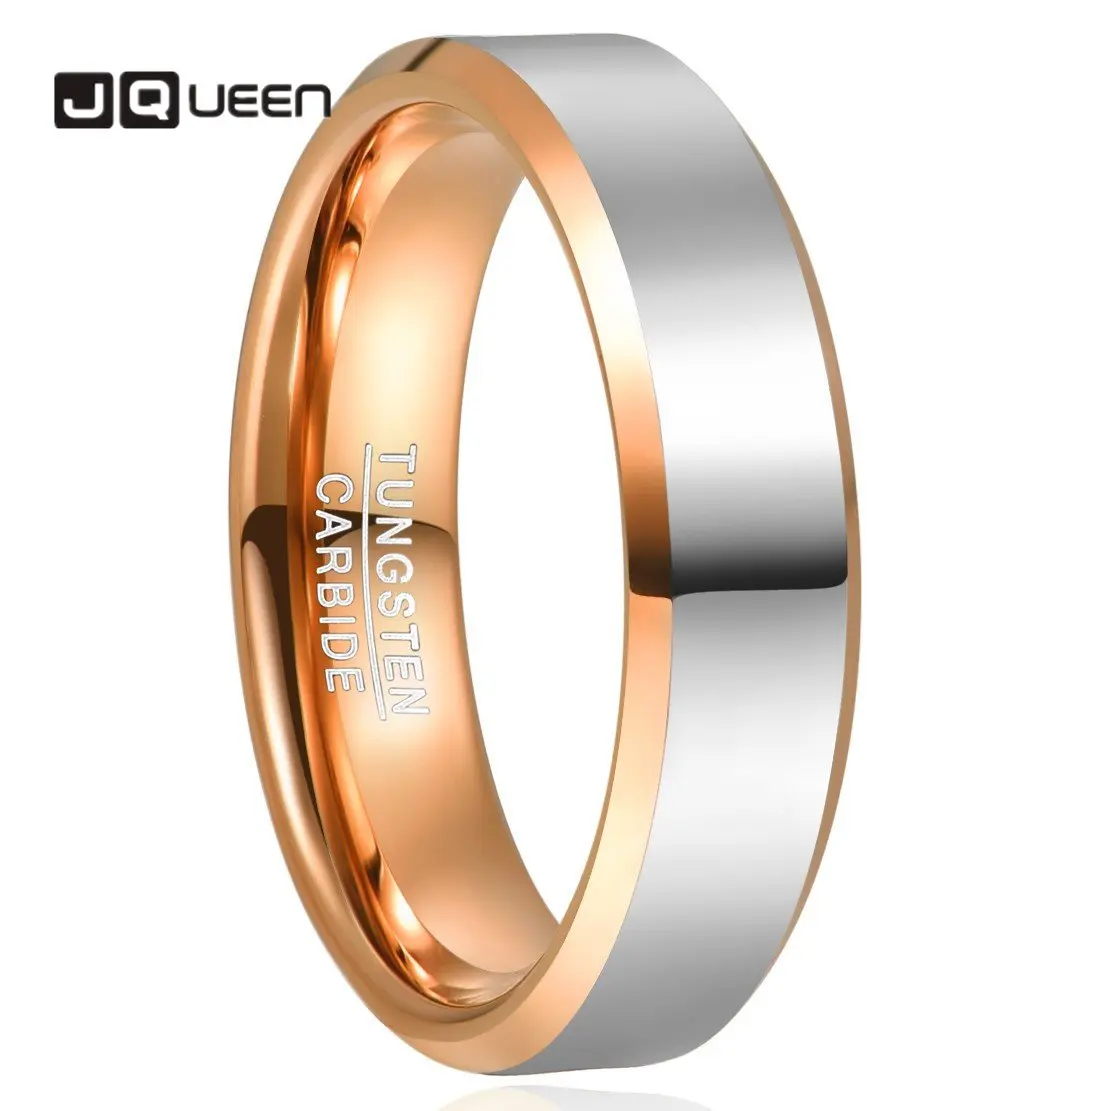 

JQUEEN 6mm Tungsten Carbide Ring Steel Color Dome Beveled Gold Rose gold Men and Women's Ring Fashion Wedding Couples Jewelry